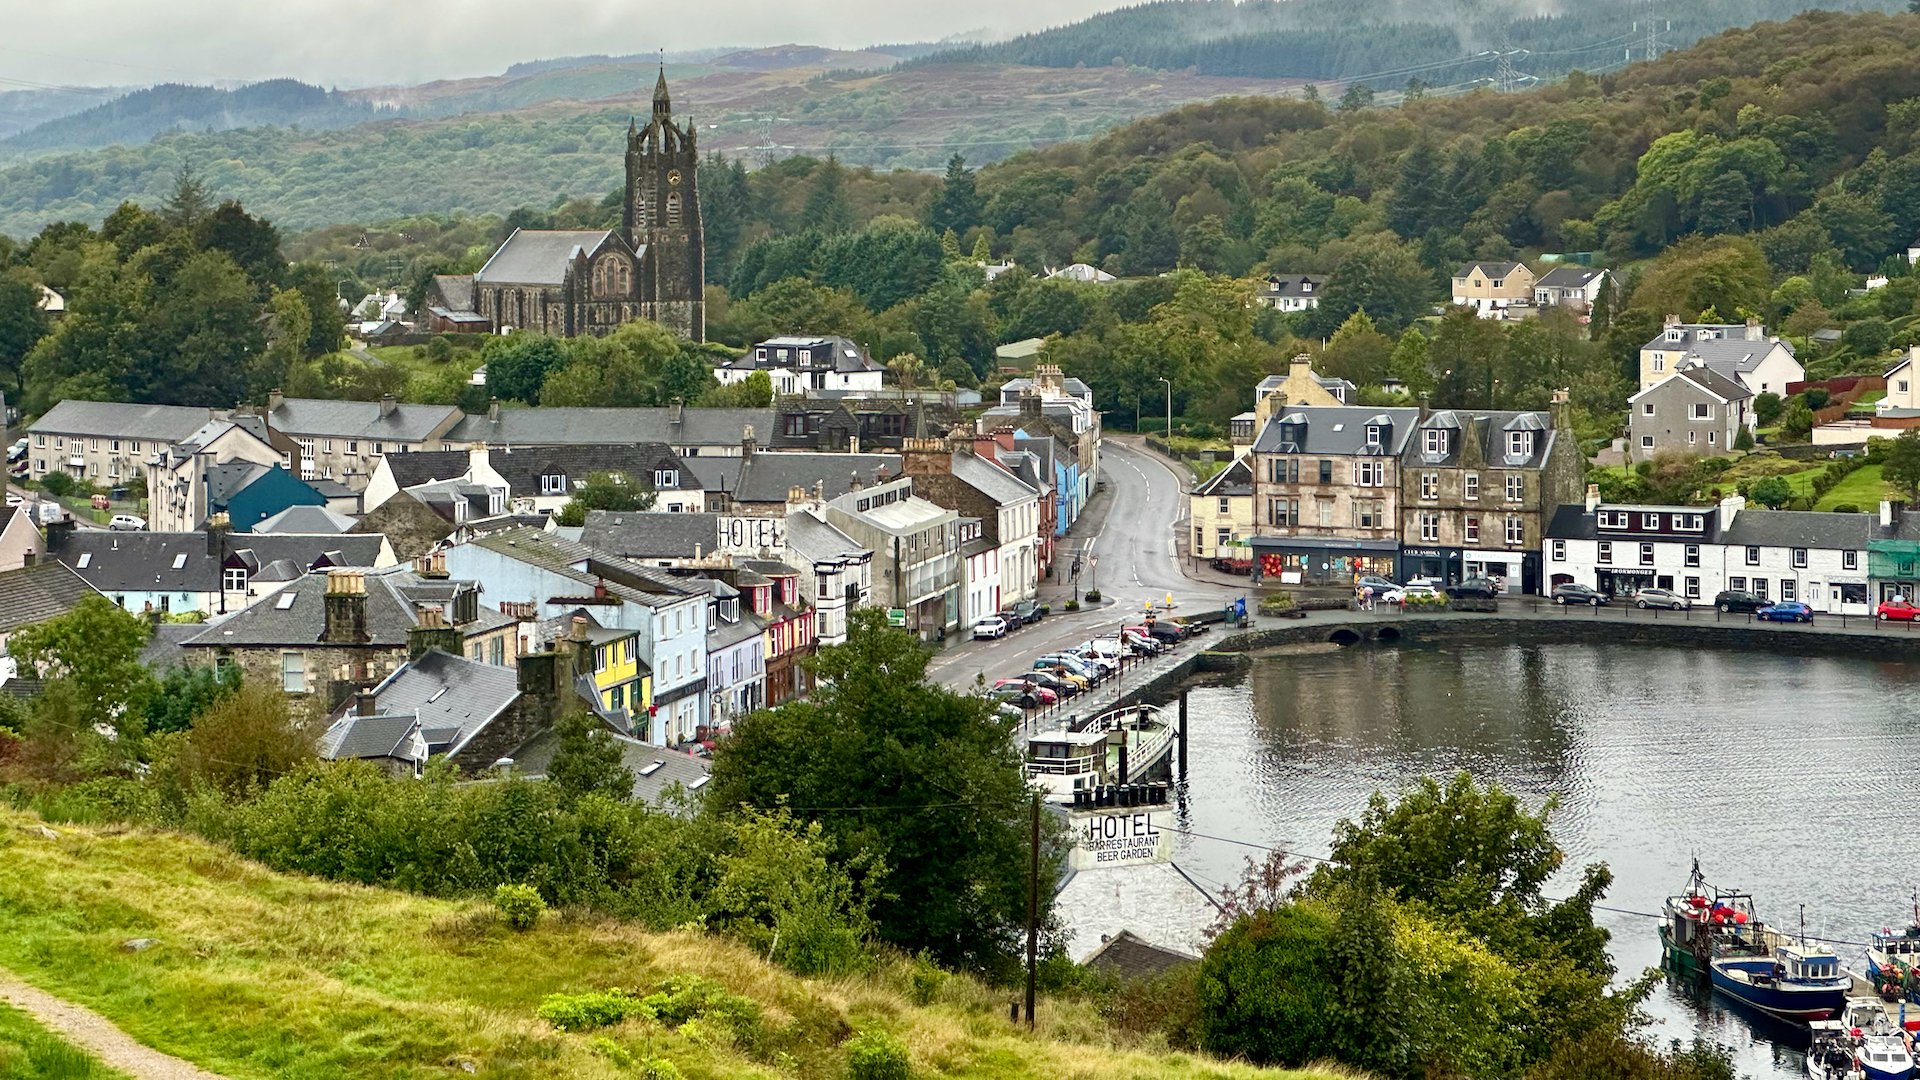  A view of the picturesque town of Tarbert.  